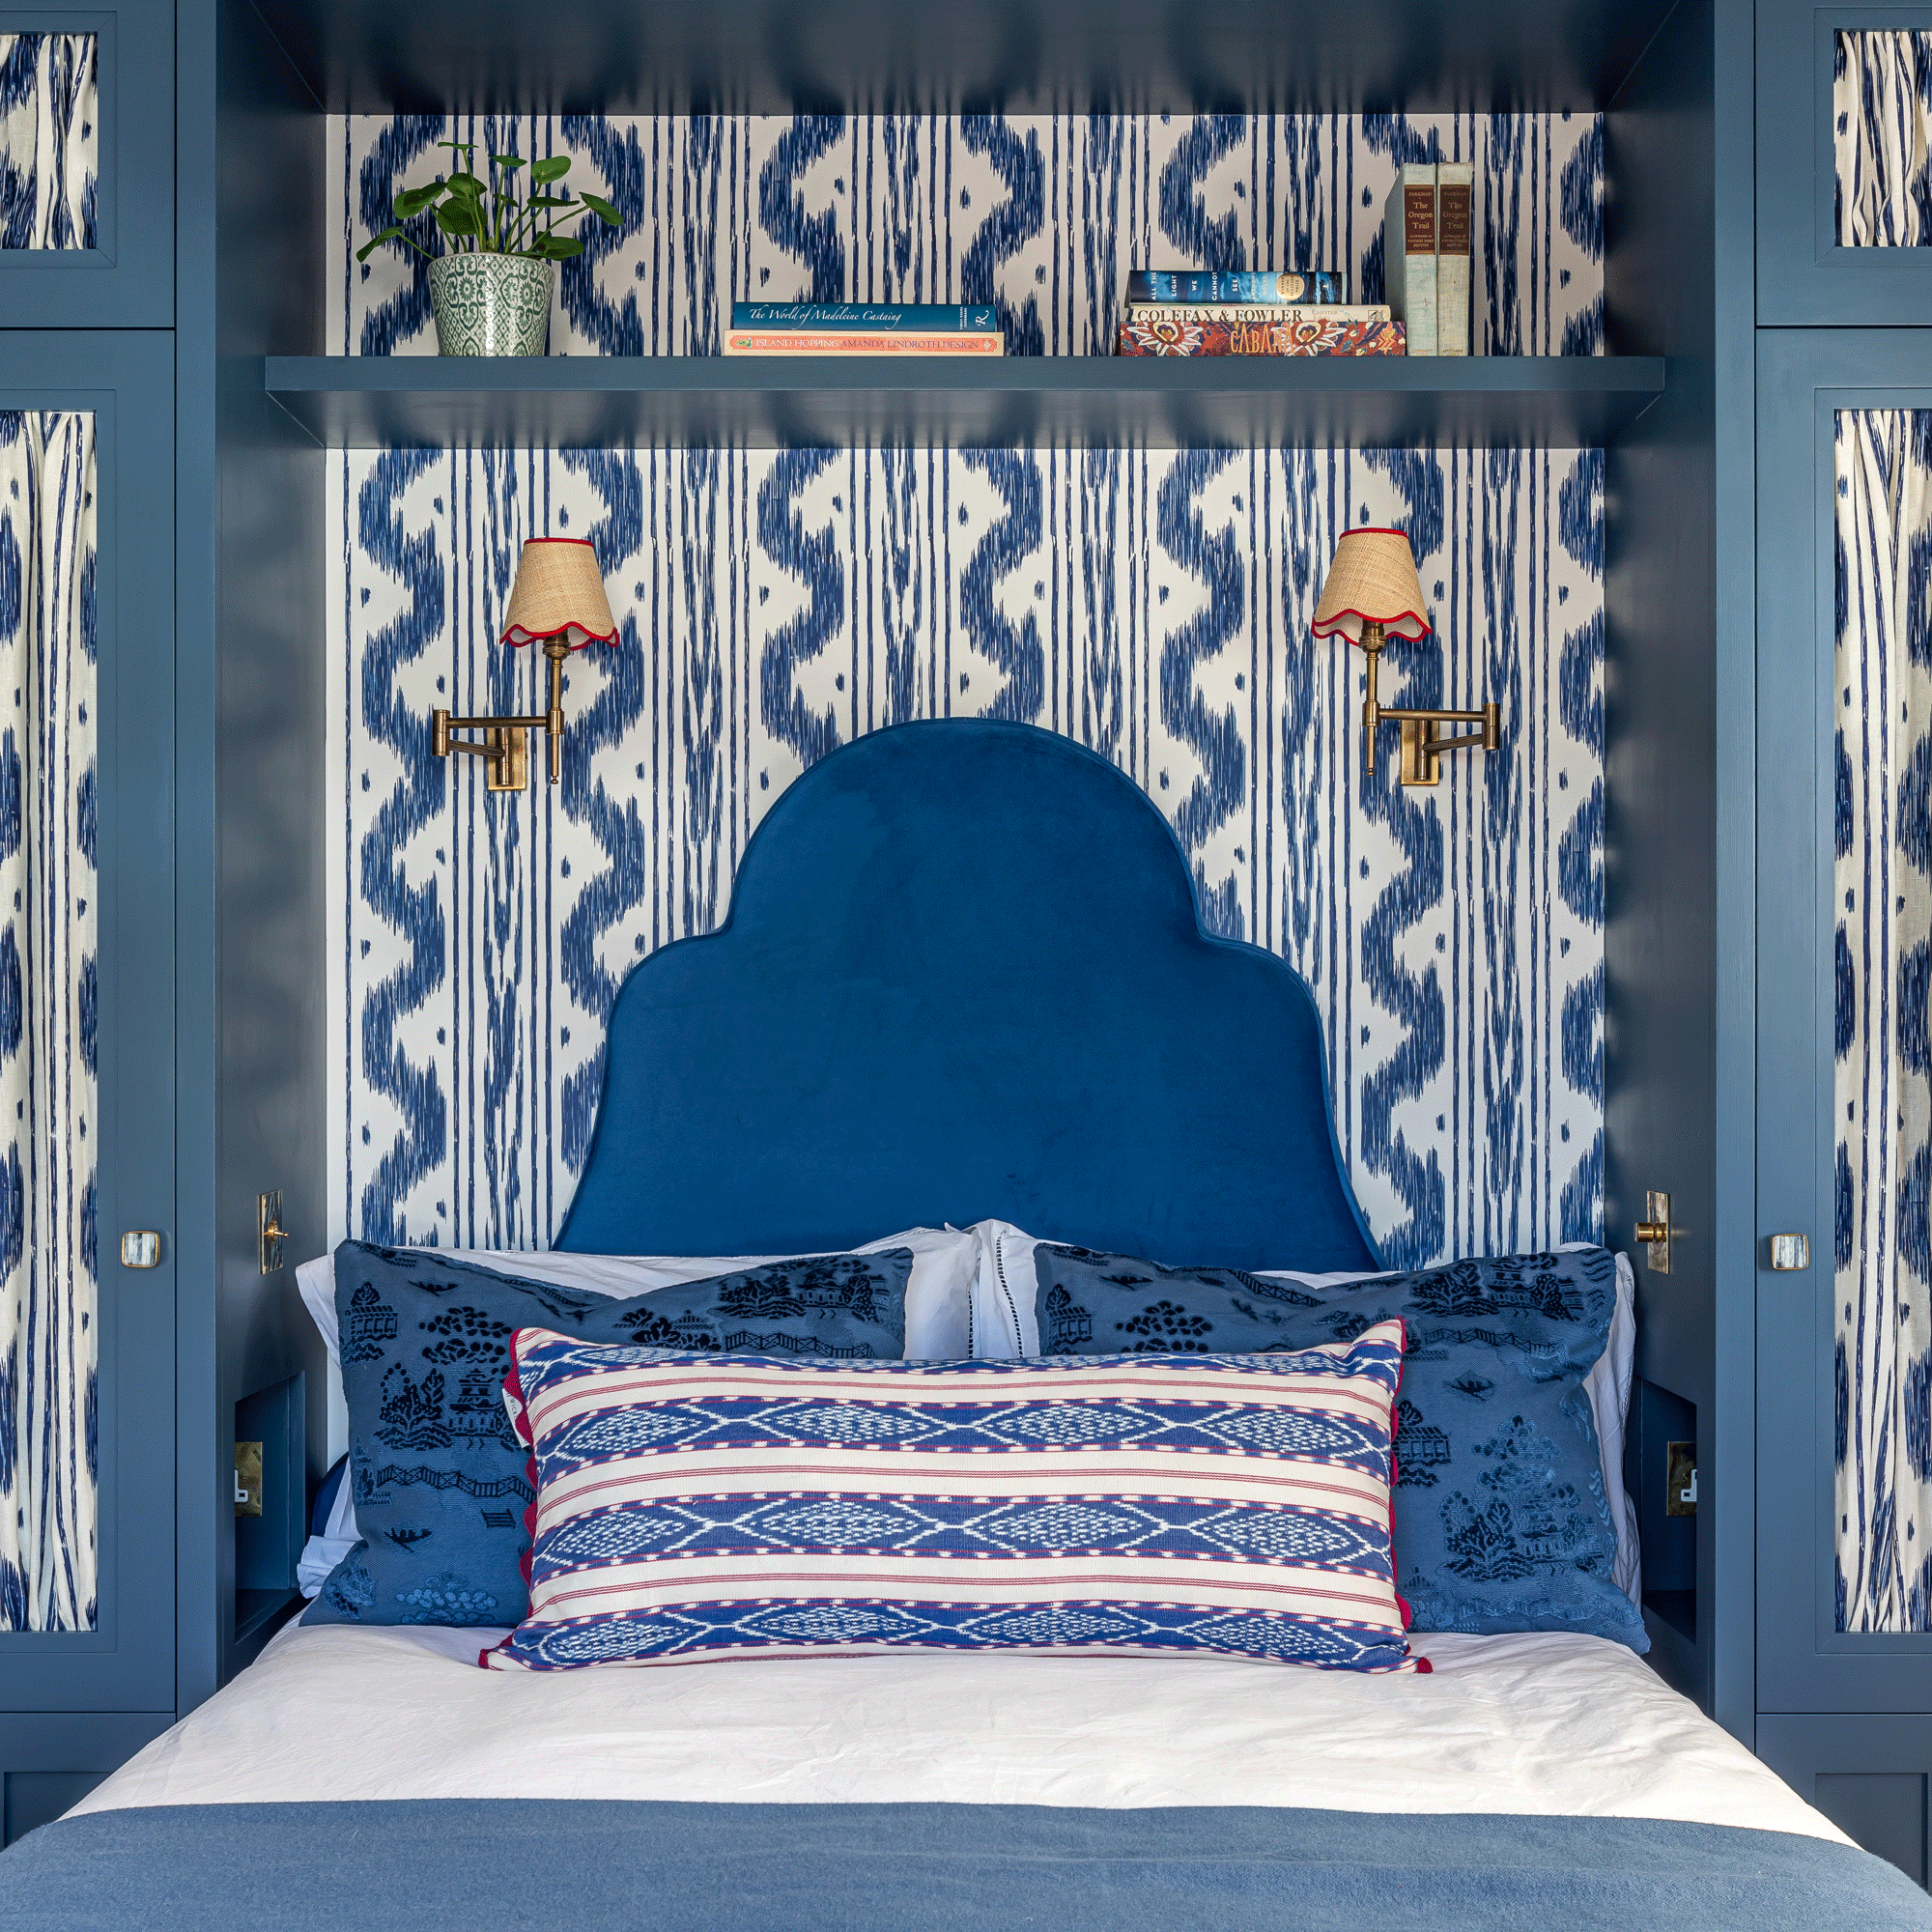 Bedroom with navy blue headboard and patterned wallpaper